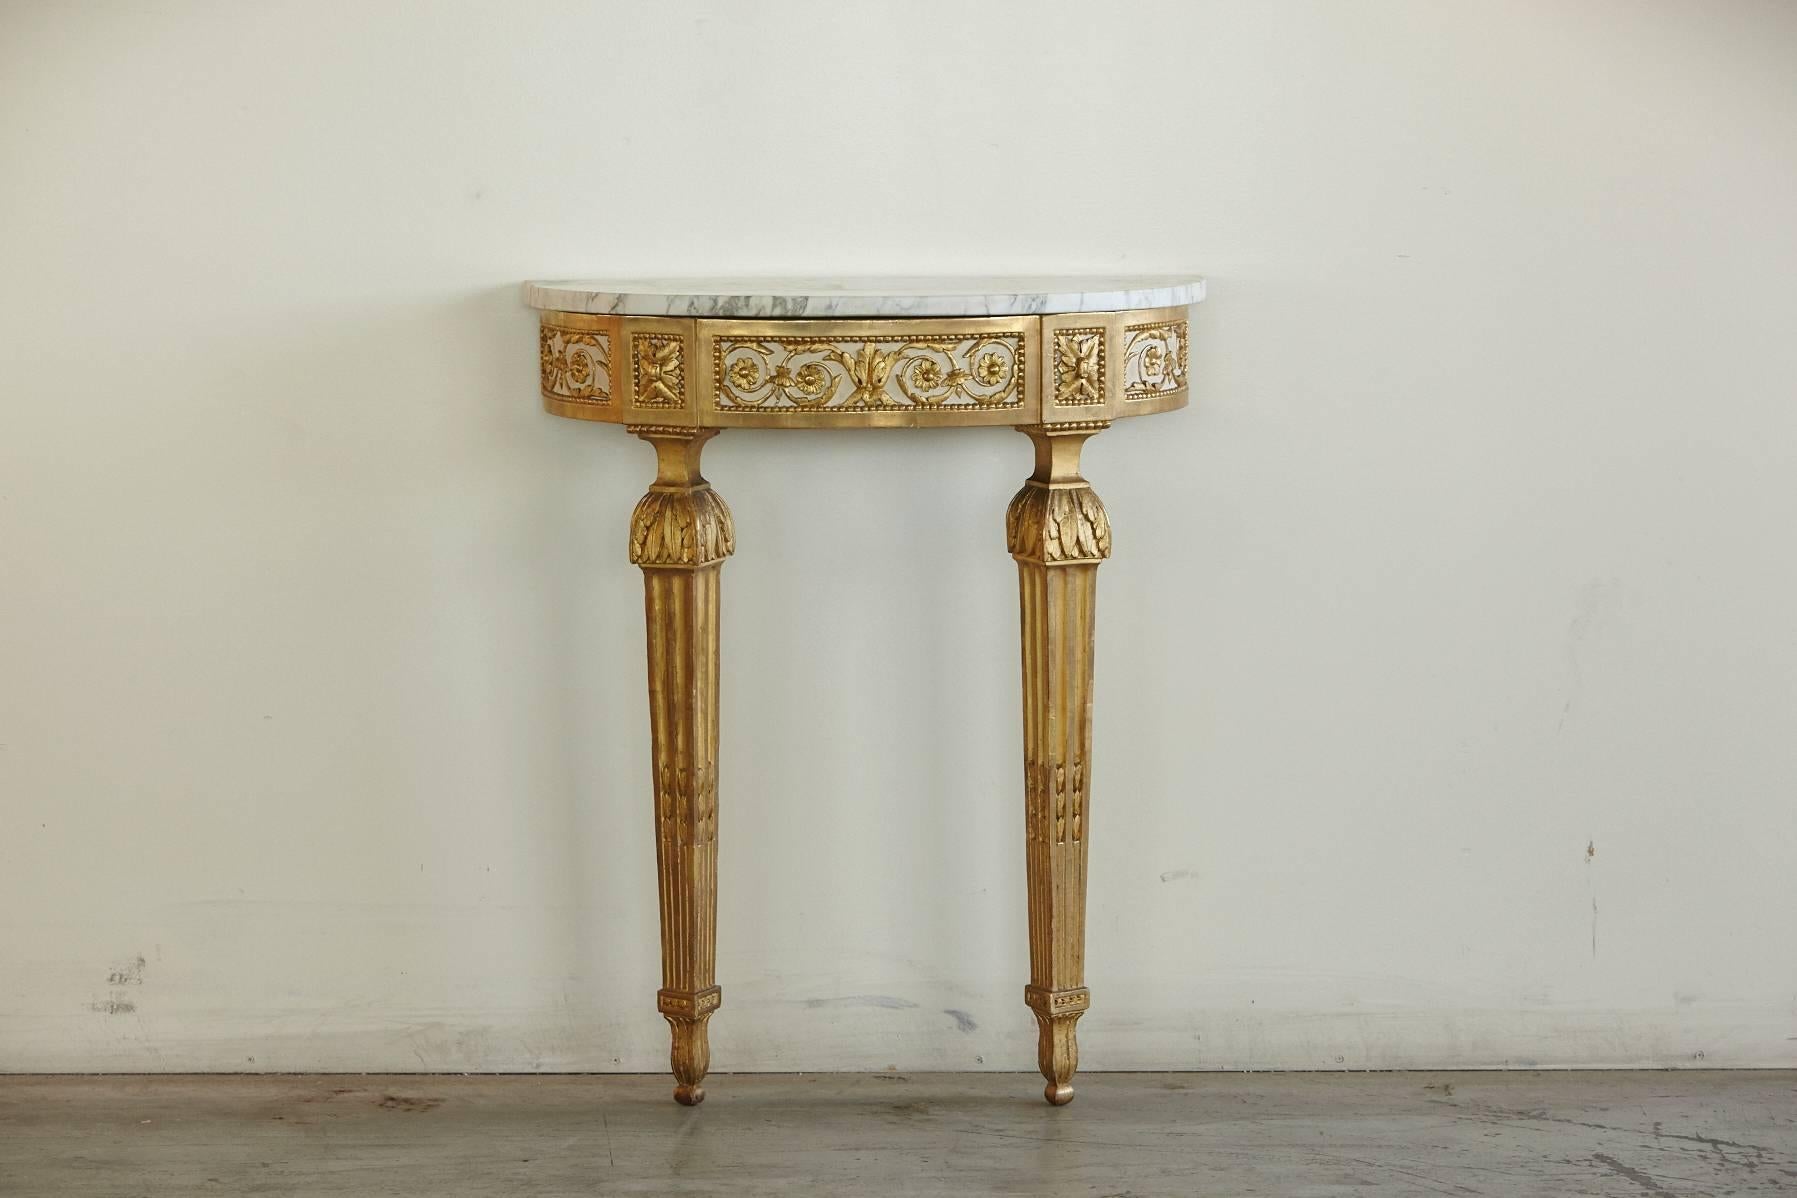 Very fine example of a Louis XVI style console with a beautifully carved gold leaf apron. The Carrara marble top is in excellent condition, circa 1870.